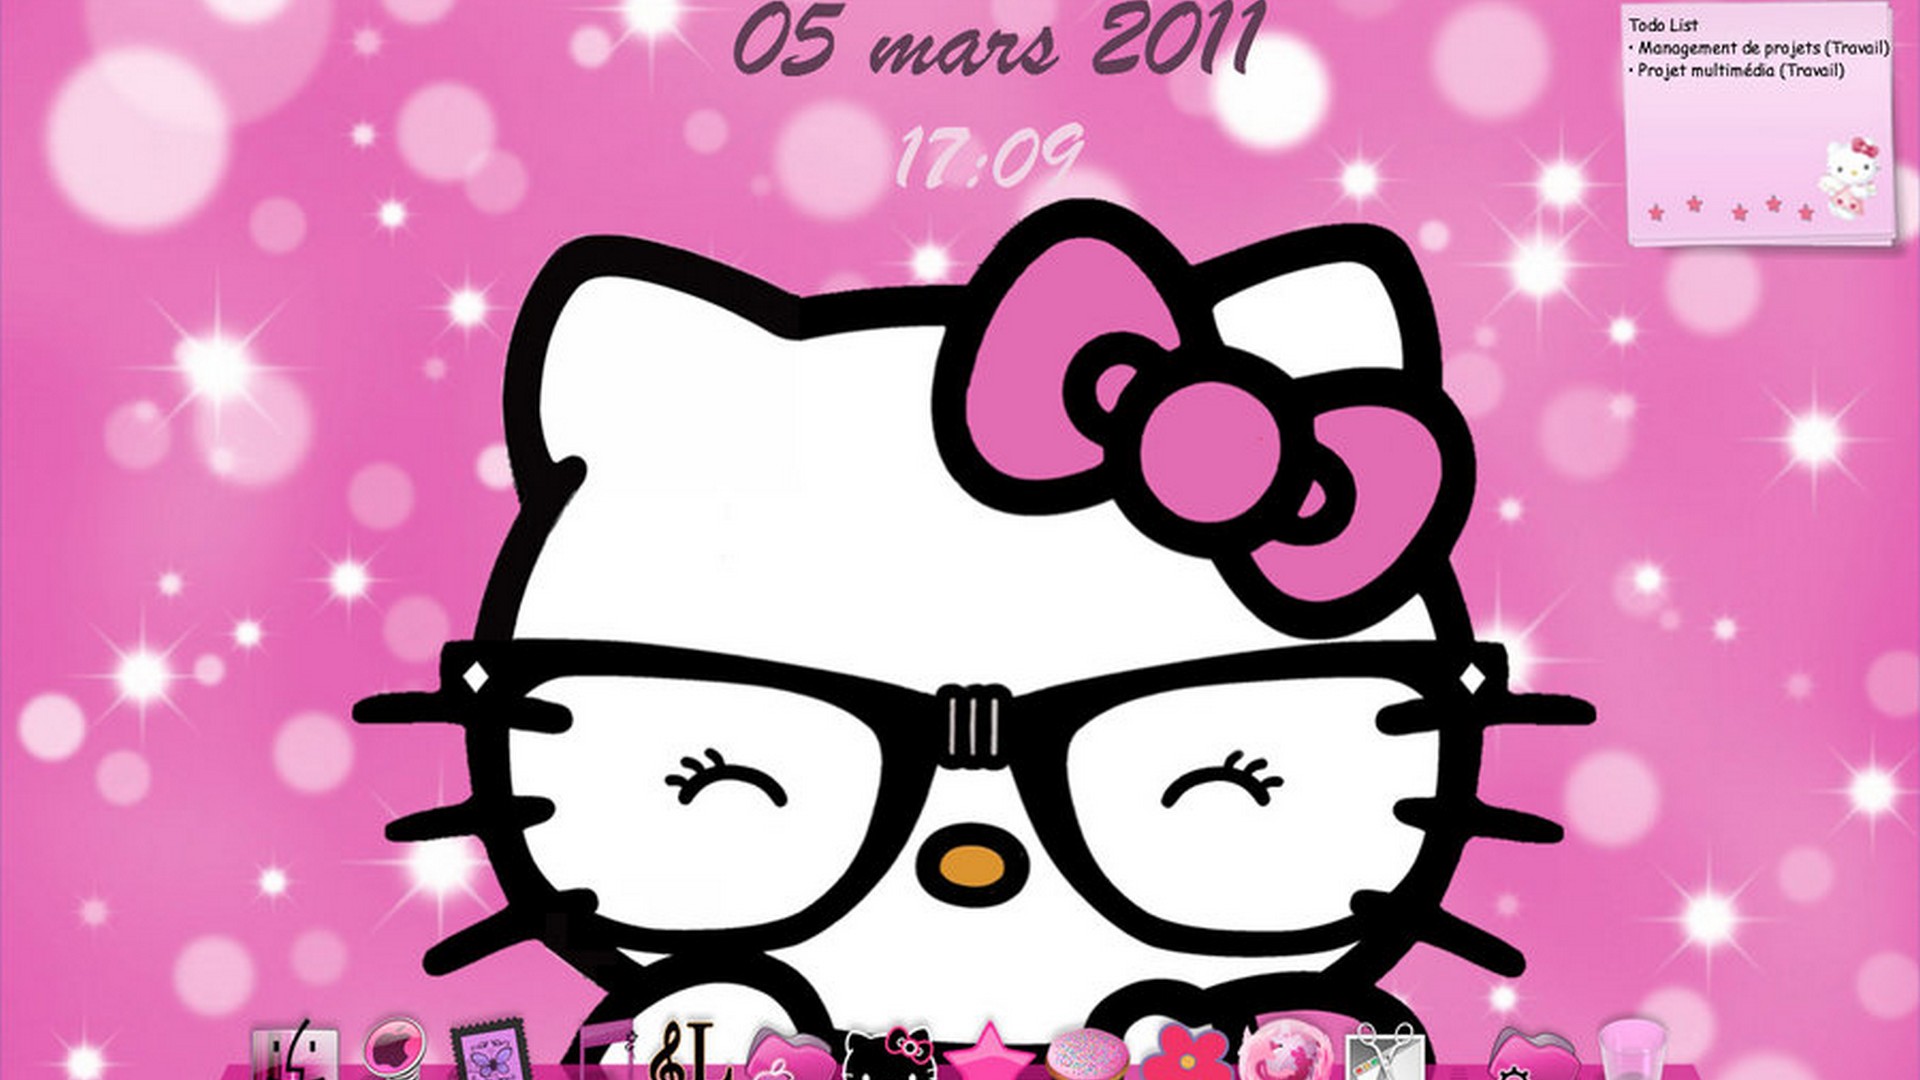 Hello Kitty Wallpaper For Desktop 2021 Cute Wallpapers Hello kitty has become a global marketing phenomena worth billions now. hello kitty wallpaper for desktop